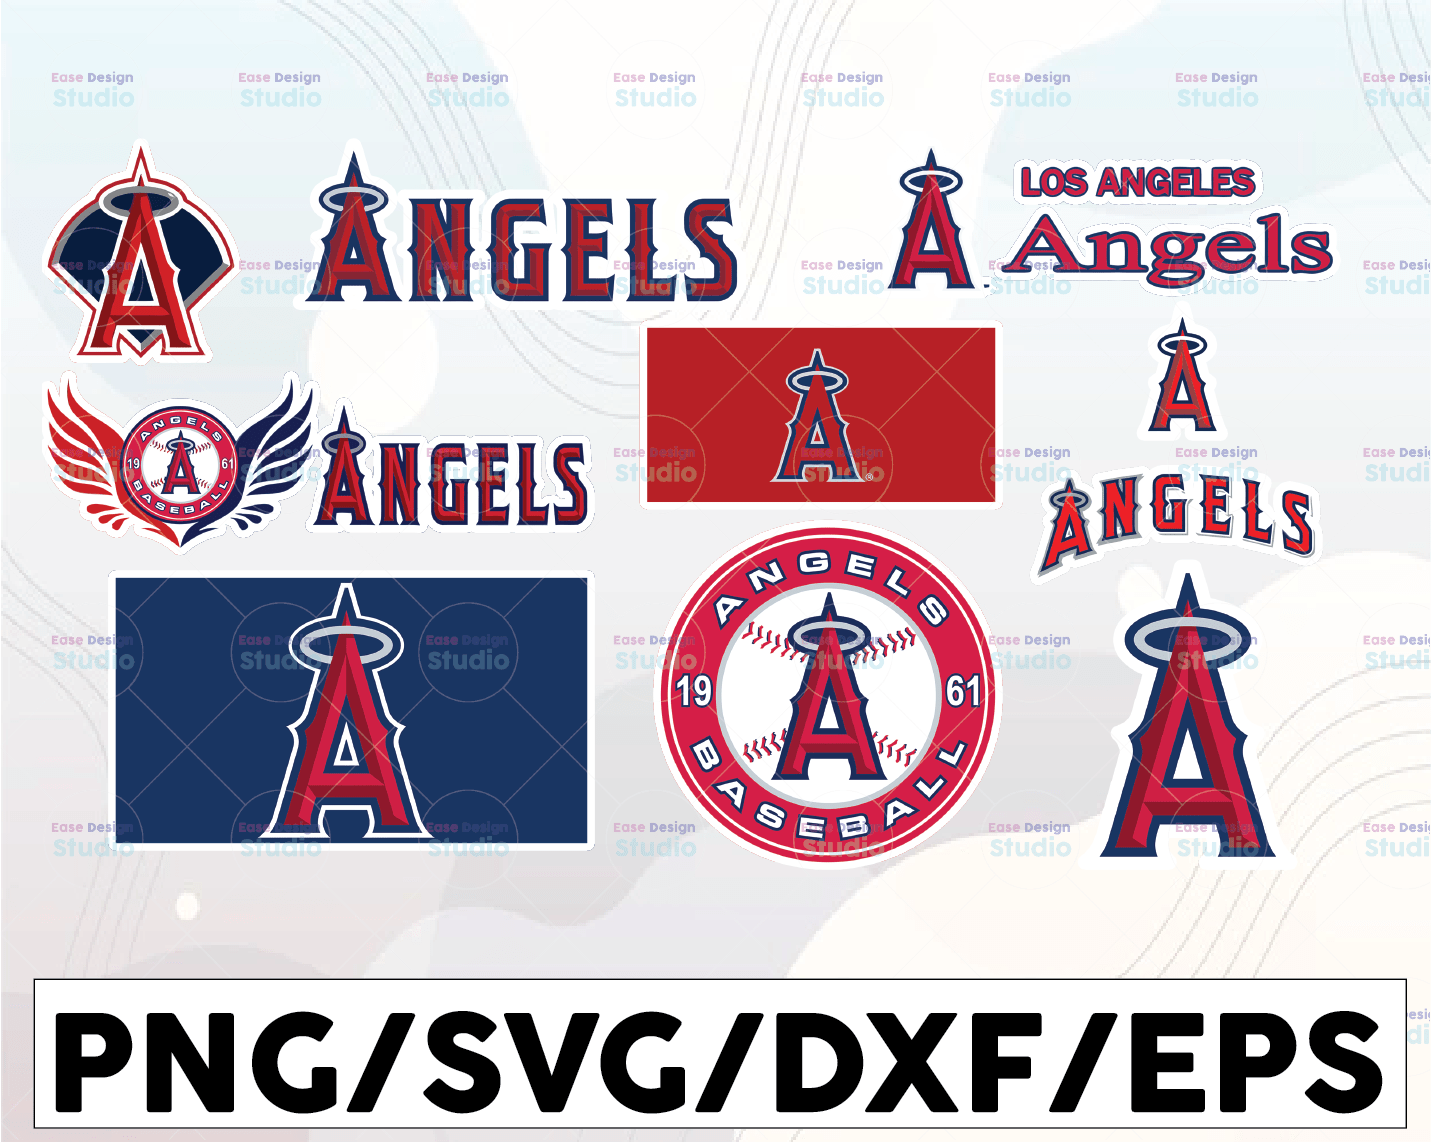 Download Los Angeles Angels Svg Files Baseball Clipart Cricut Los Angeles Cutting Files Baseball Dxf Clipart Instant Download Vectorency